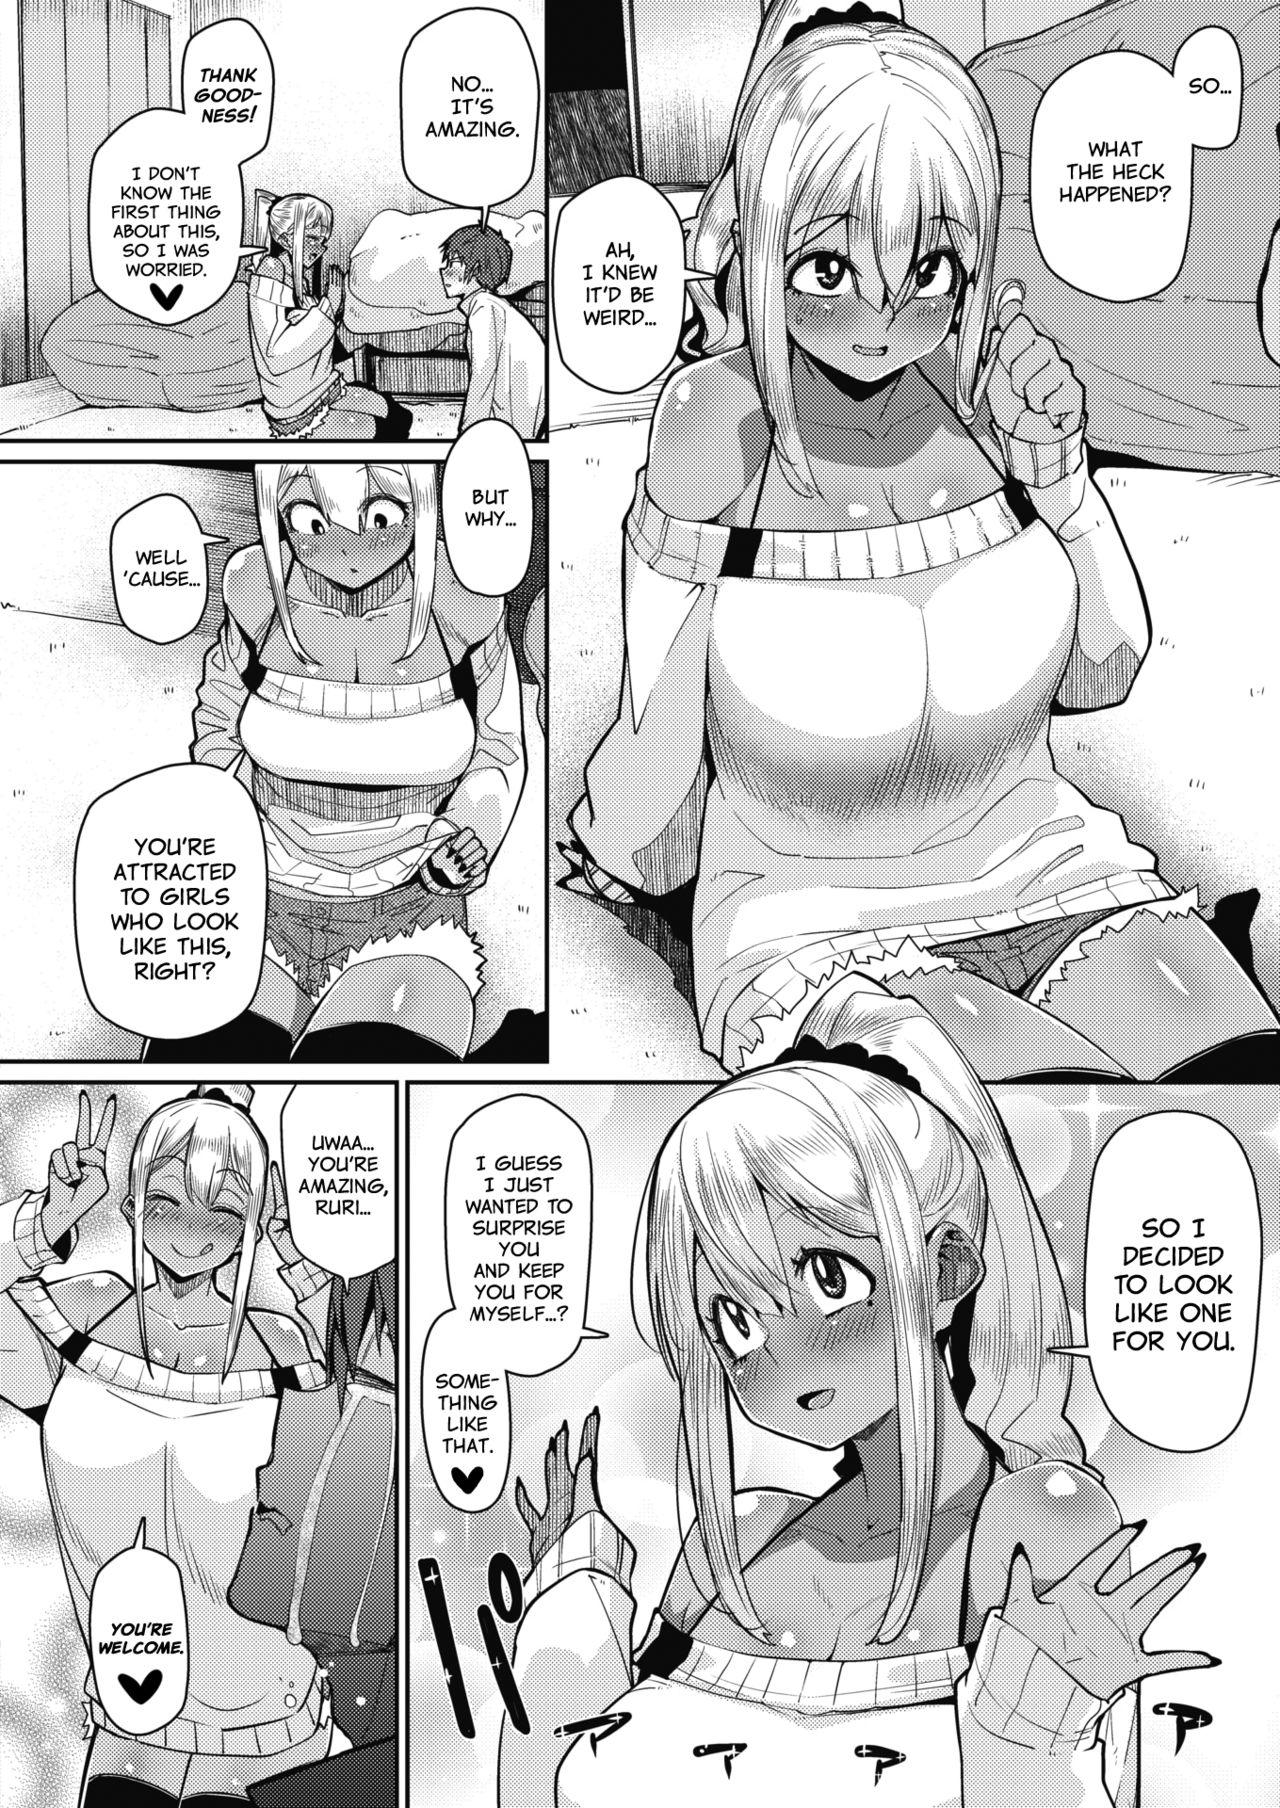 Boy Girl Gekkan "The Bitch" o Mita Onna no Hannou ni Tsuite | About the Reaction of the Girl Who Saw "The Bitch Monthly" Hardcore - Page 4